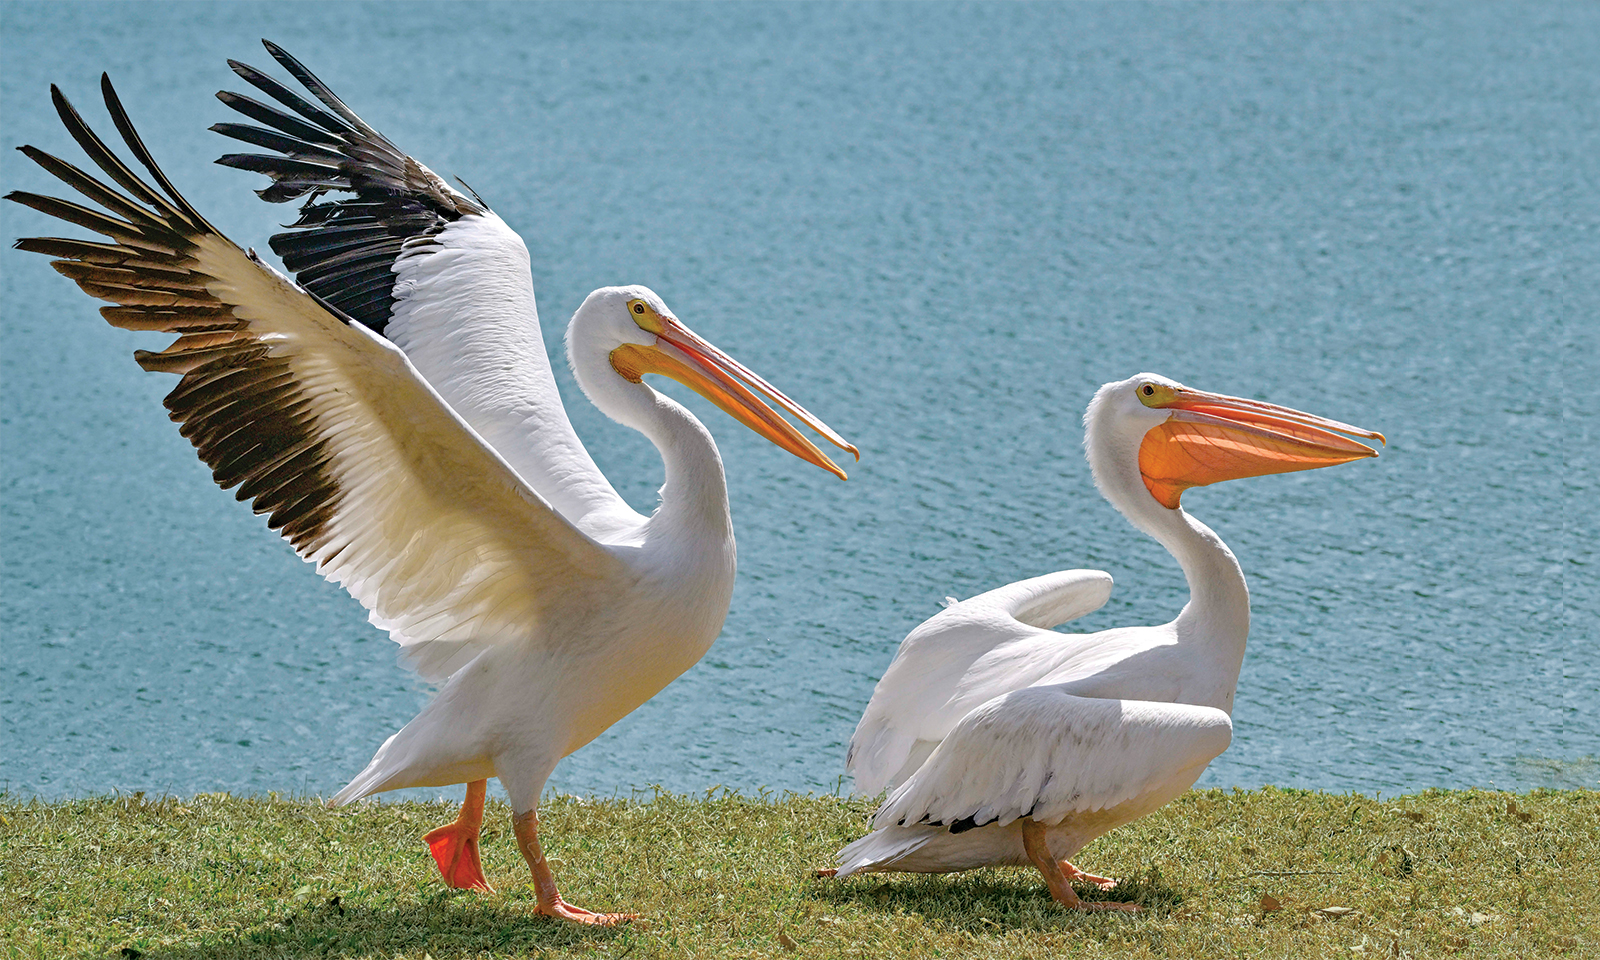 White pelicans take flight after recovery